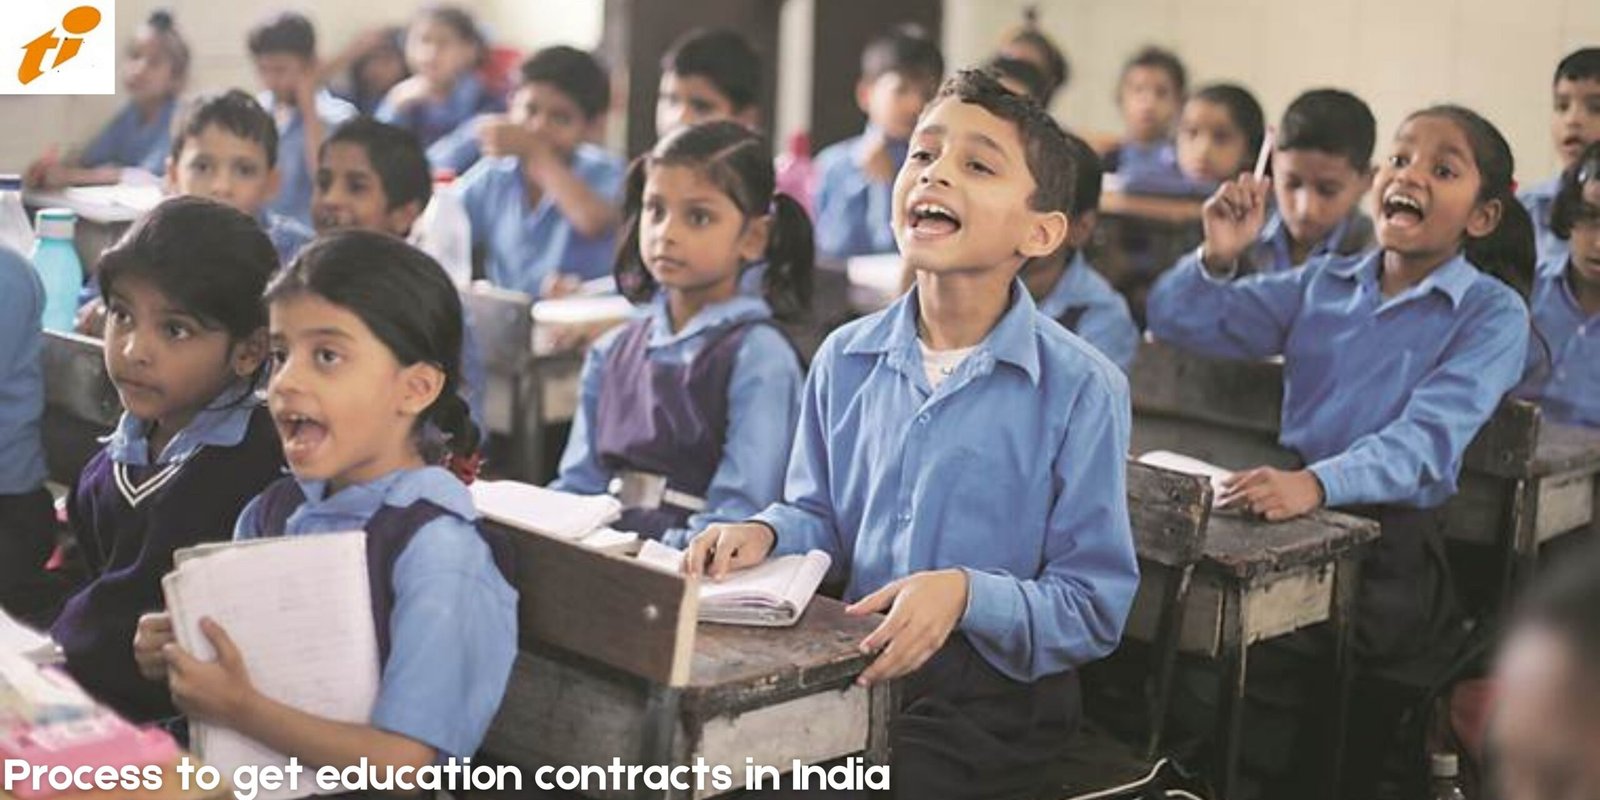 Process to get education contracts in India